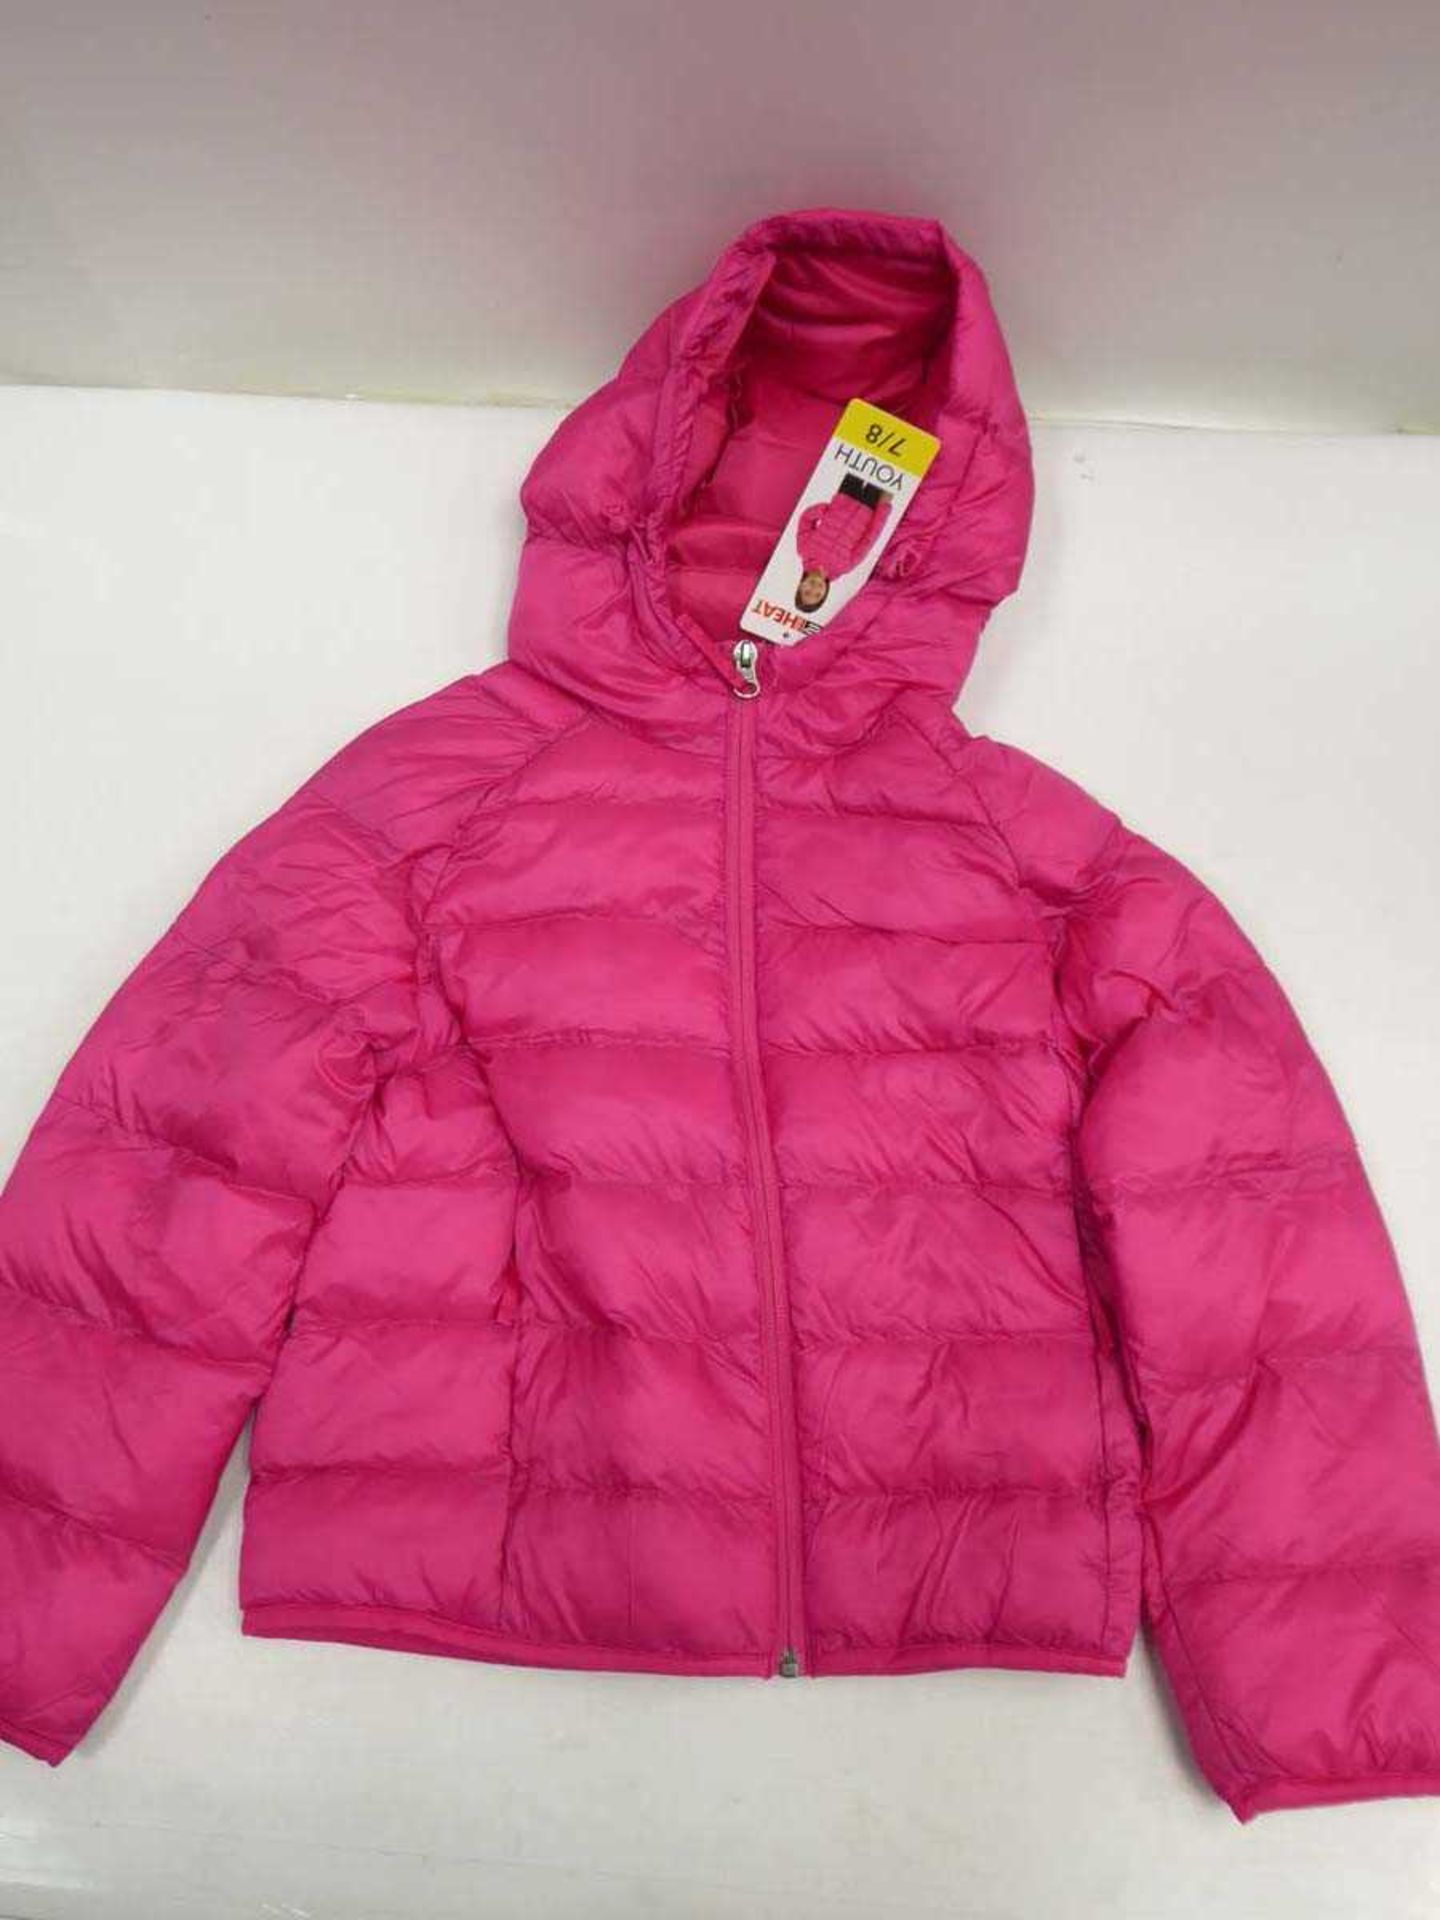 20 kids 32 Degree Heat youth jackets in mixed colours - Image 4 of 4